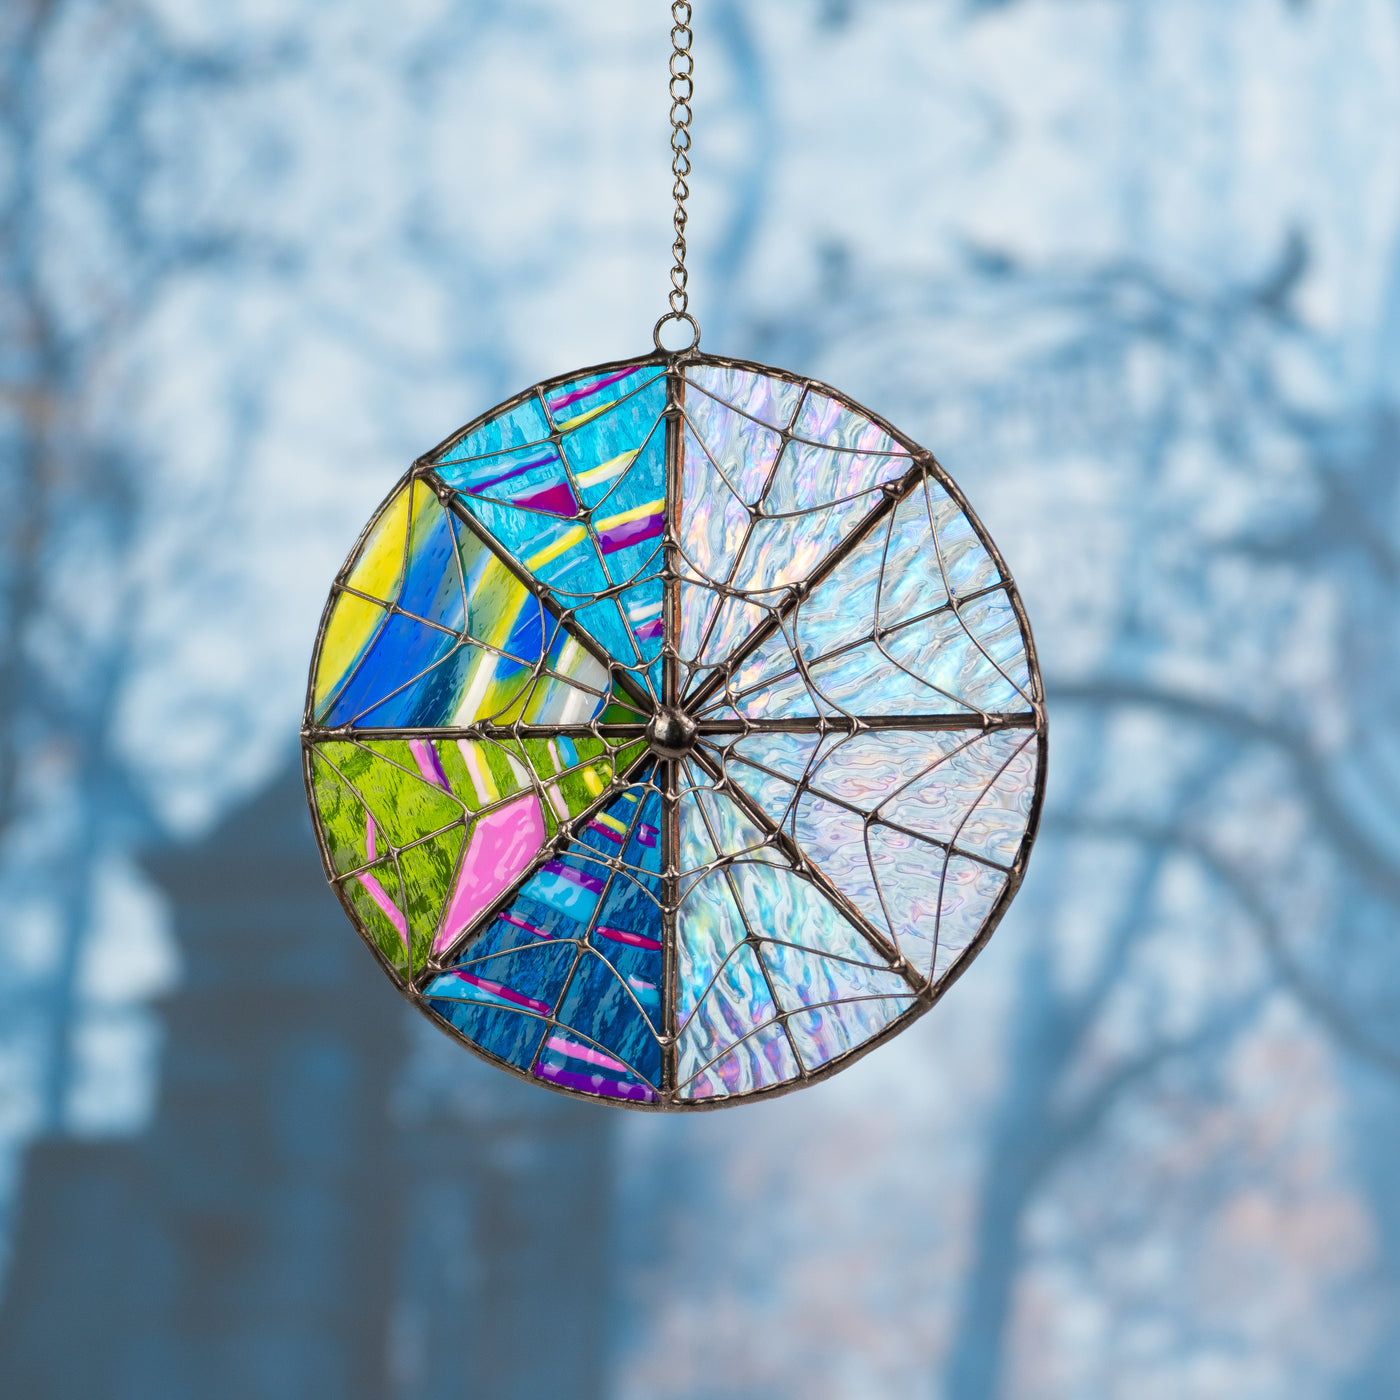 Inspired by the series Wednesday stained glass suncatcher